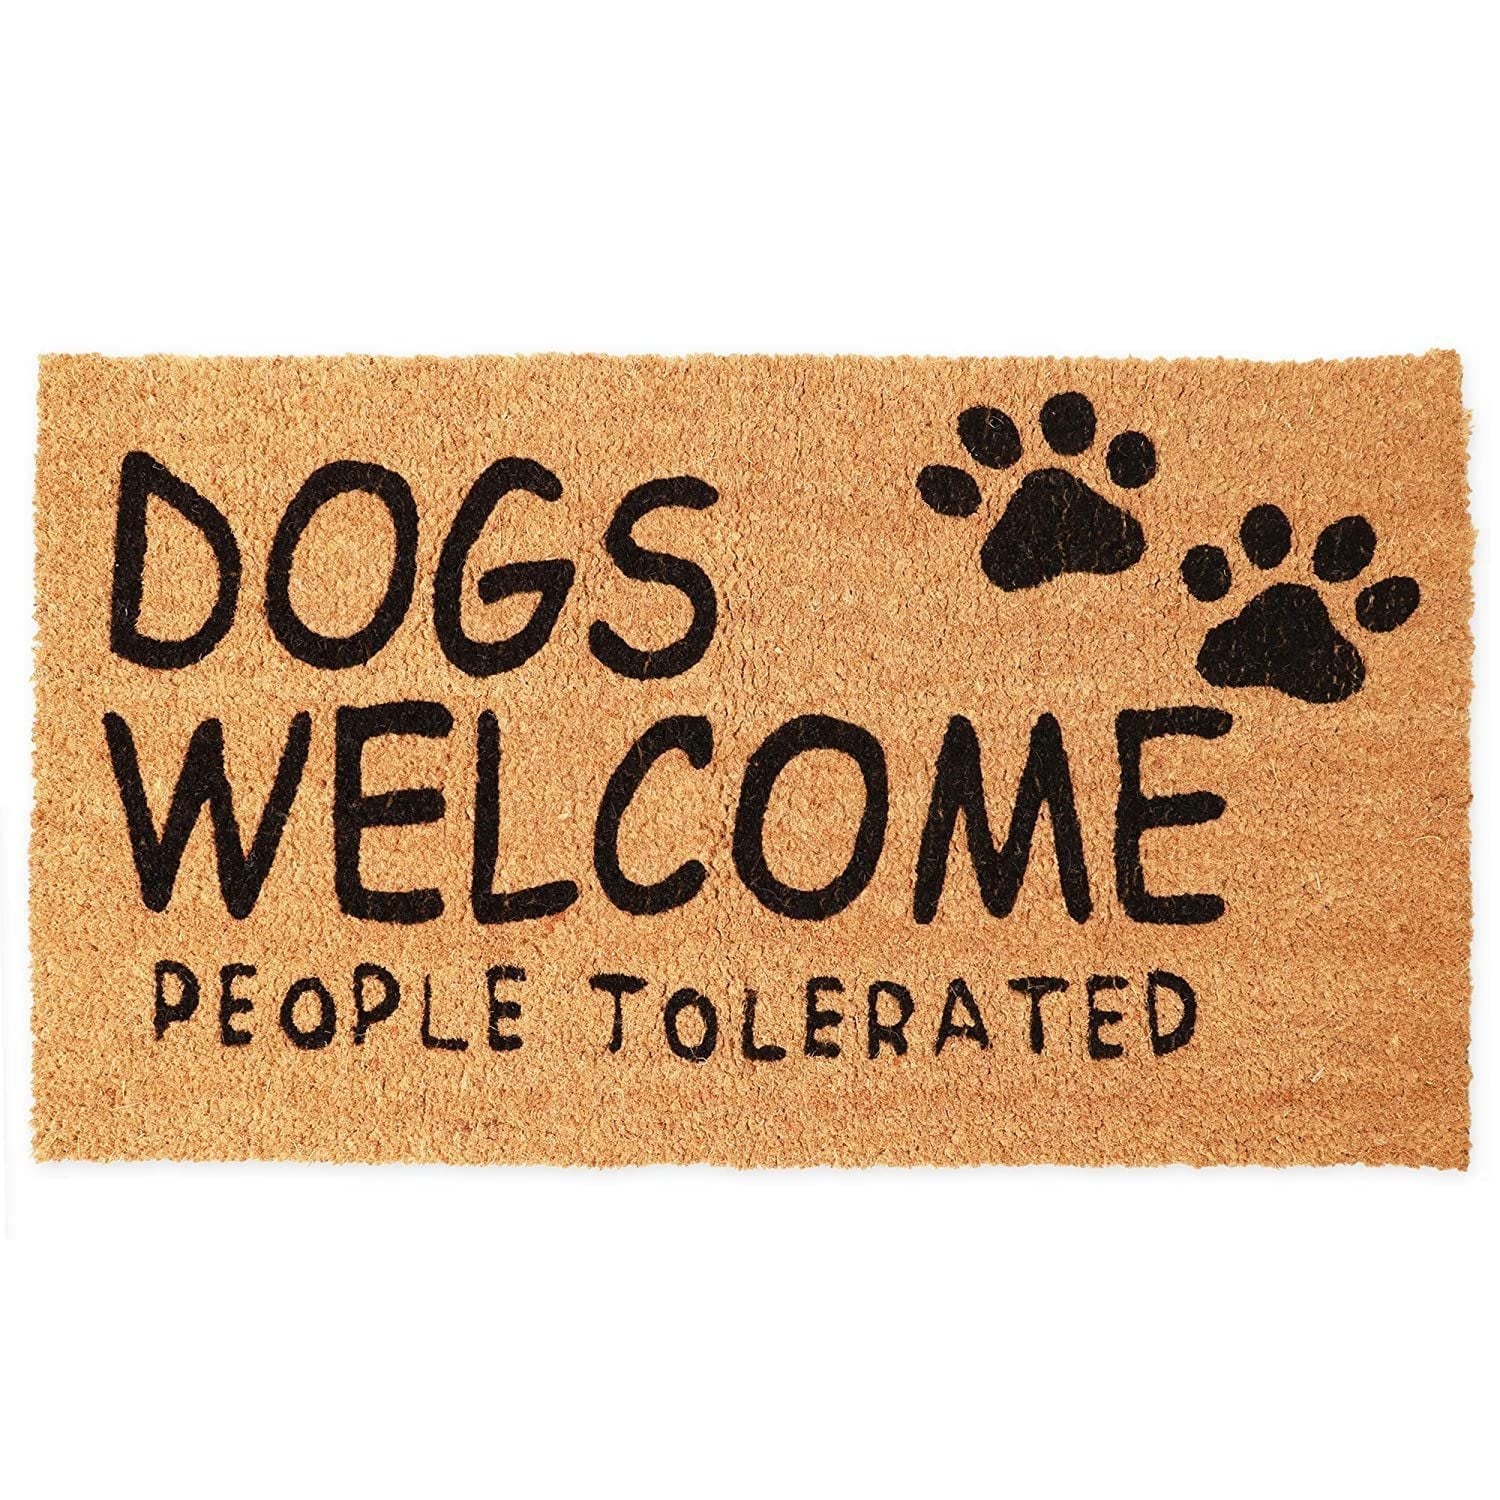 https://ak1.ostkcdn.com/images/products/is/images/direct/e963a589c5610b7655313c450ab306d36b2b6ccb/Dogs-Welcome-People-Tolerated-Door-Mat%2C-17%22x30%22-Indoor-Outdoor-Coir-Doormat.jpg